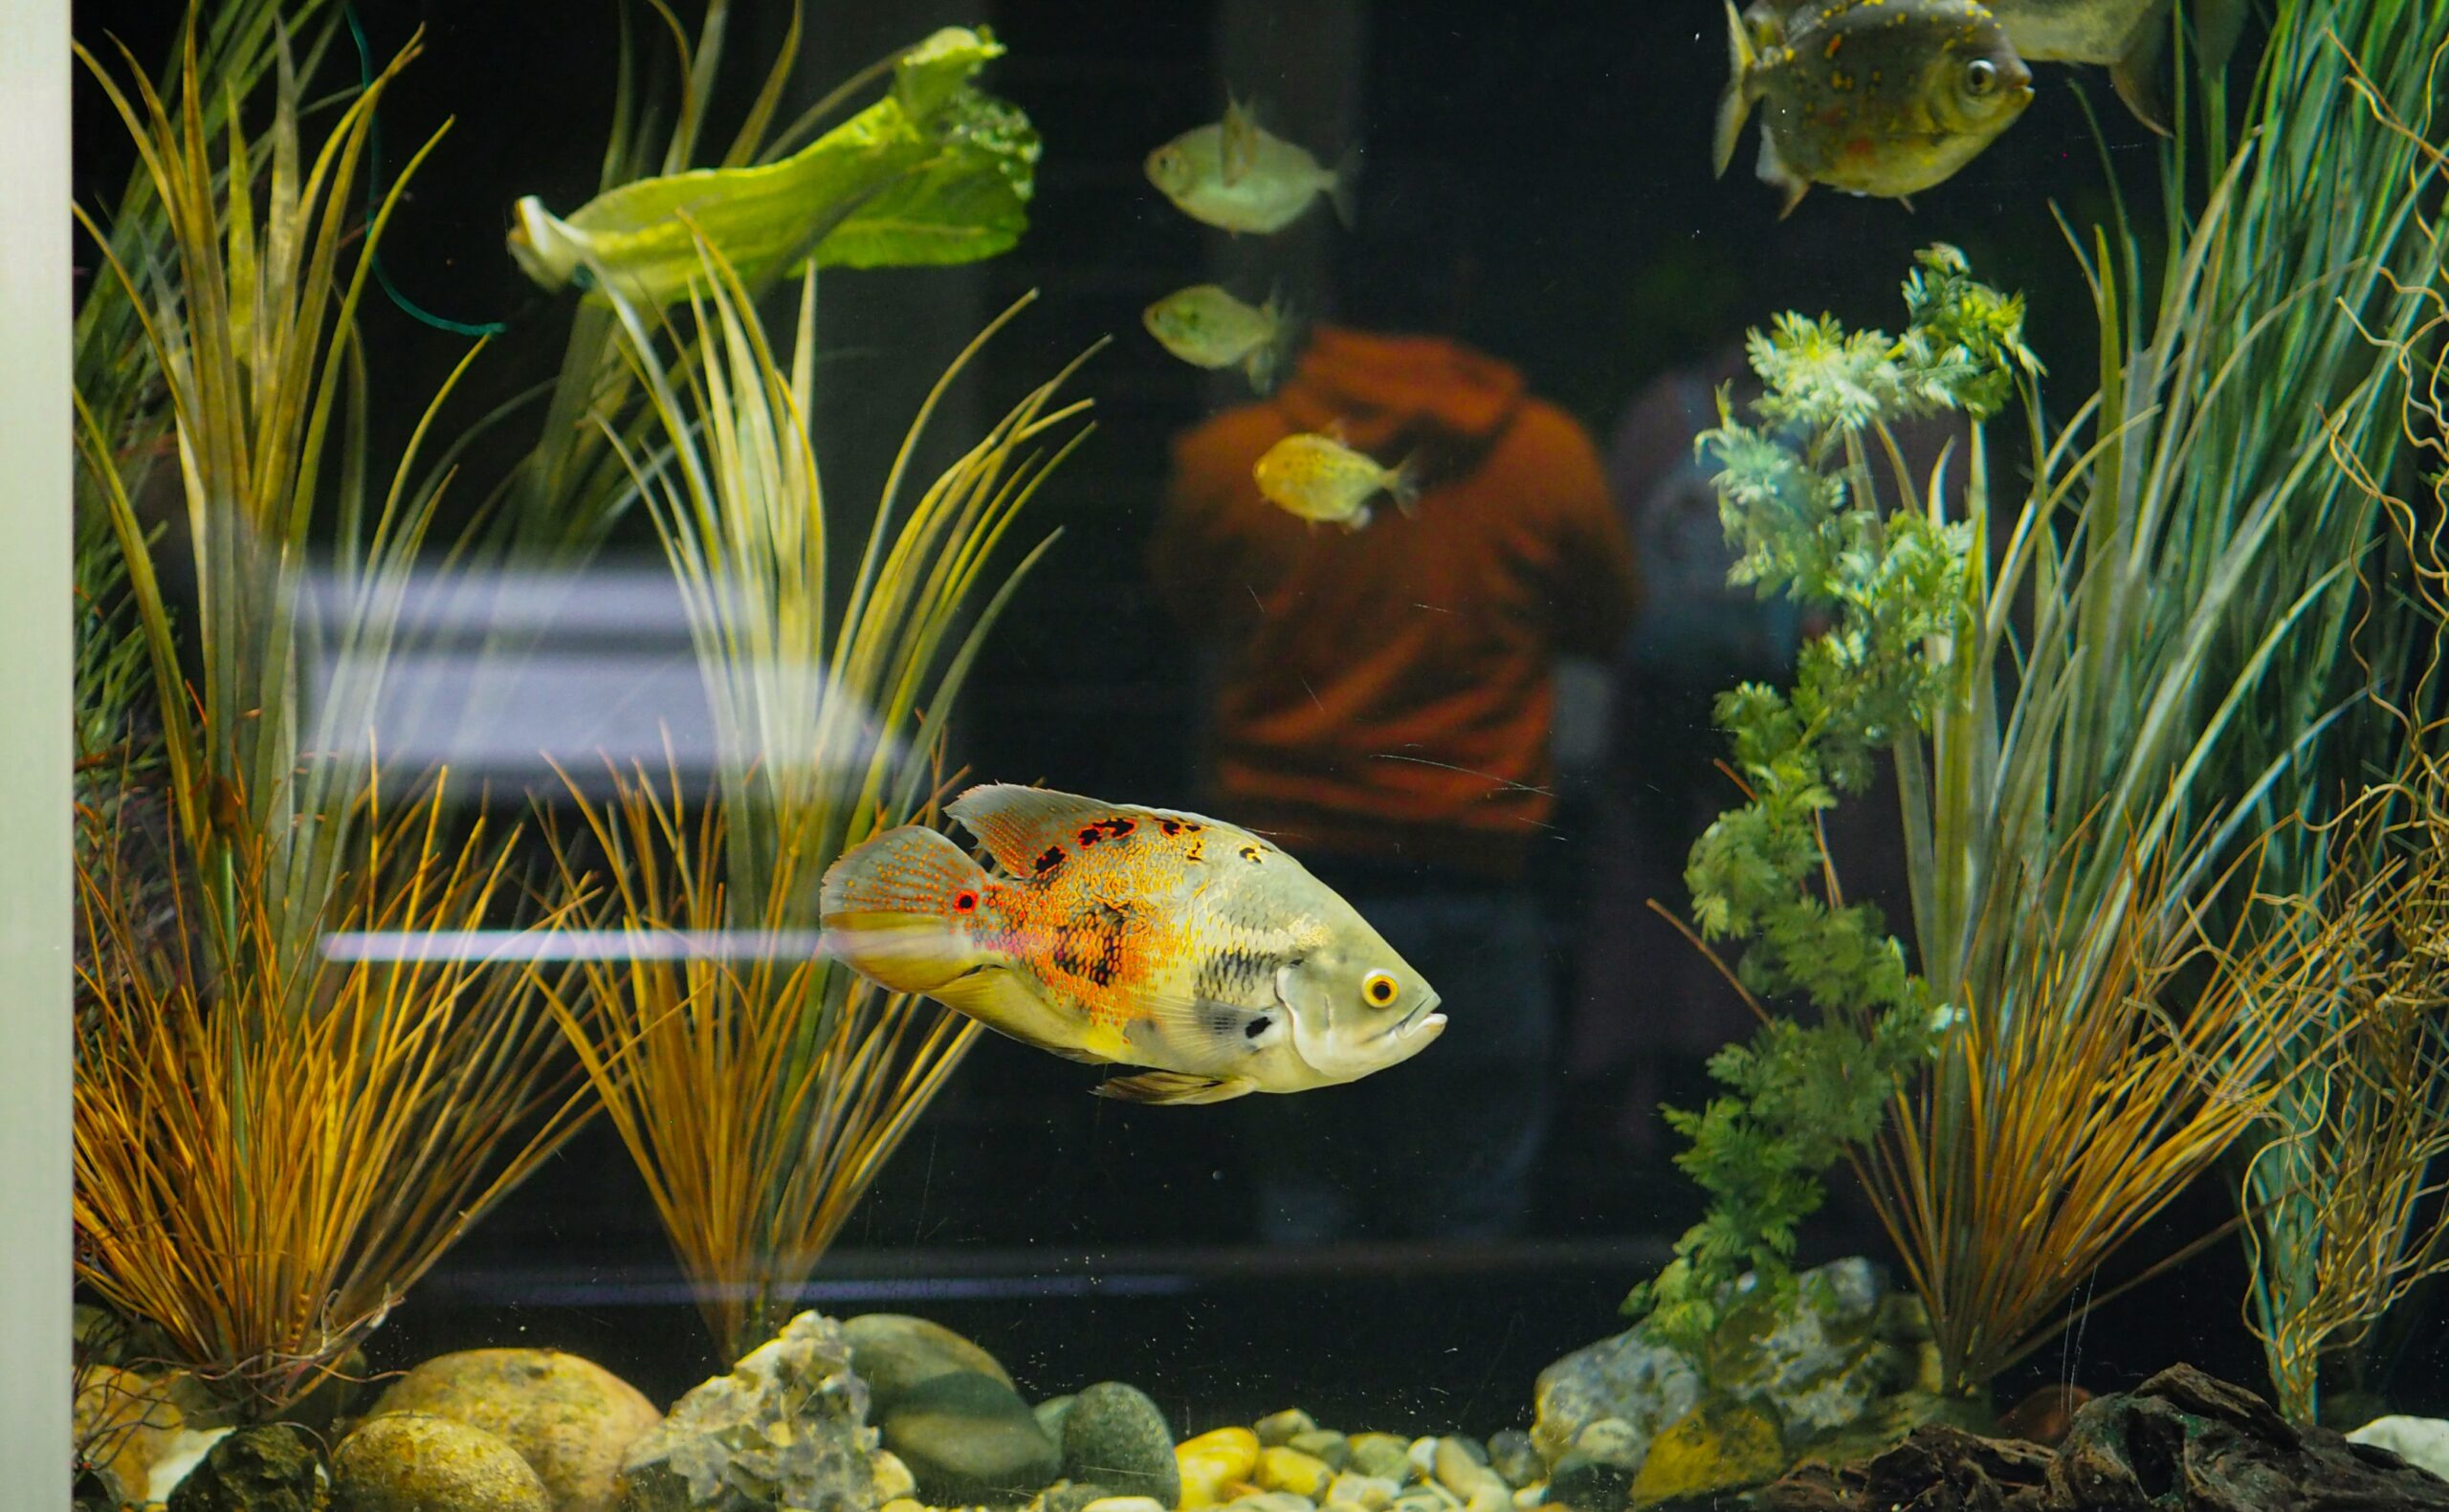 ornamental fish import license guidelines